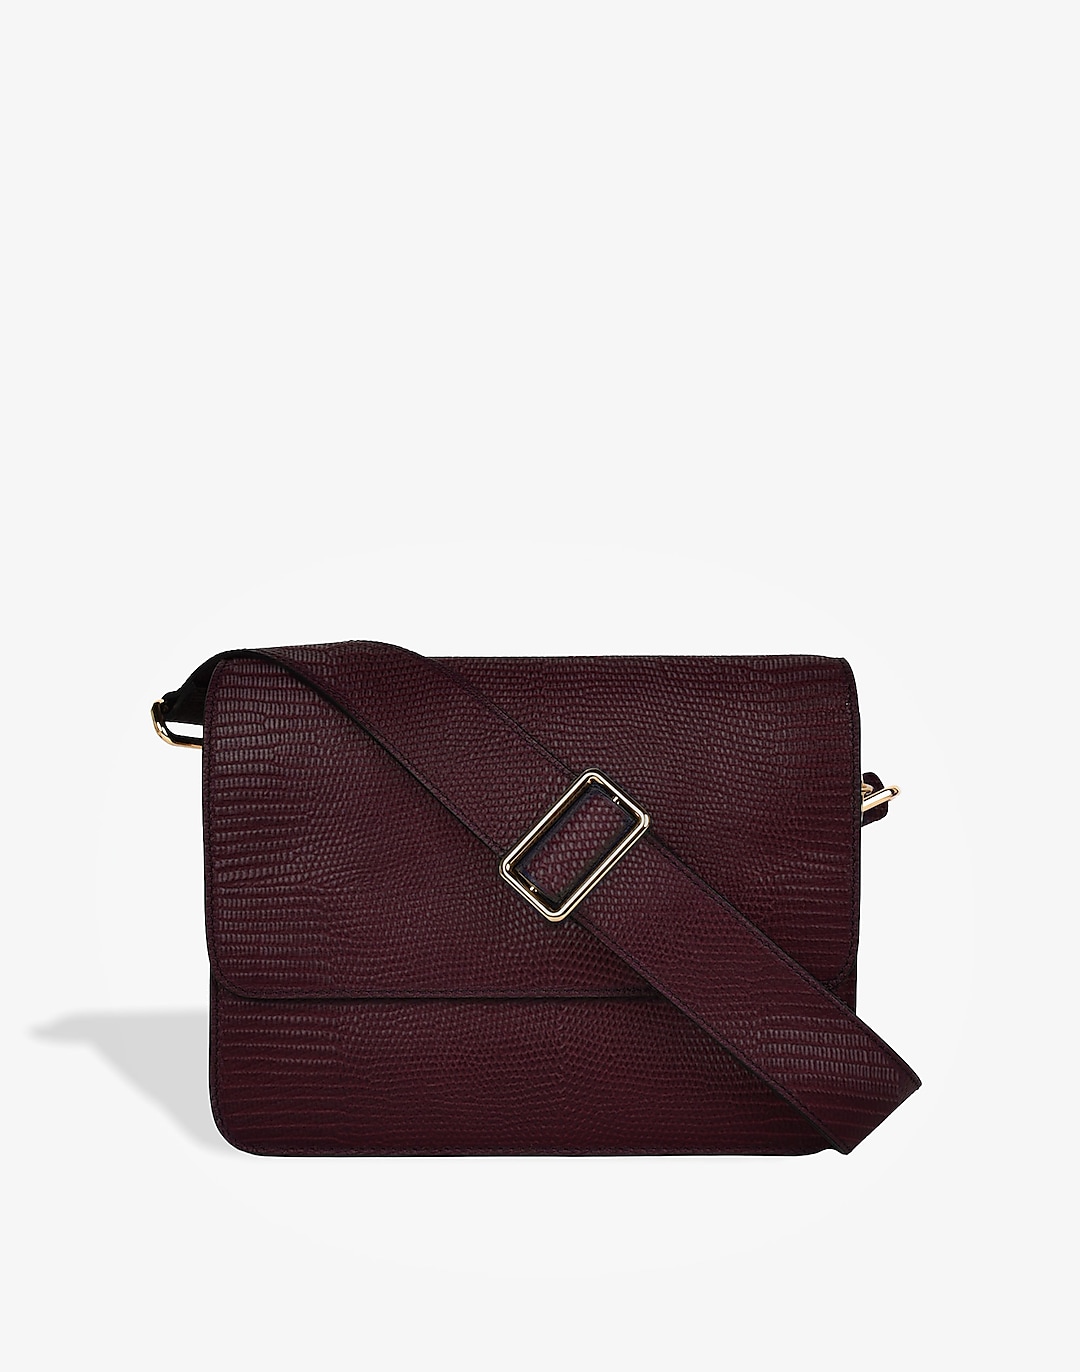 Hyer Goods Luxe Cube Bag | Madewell